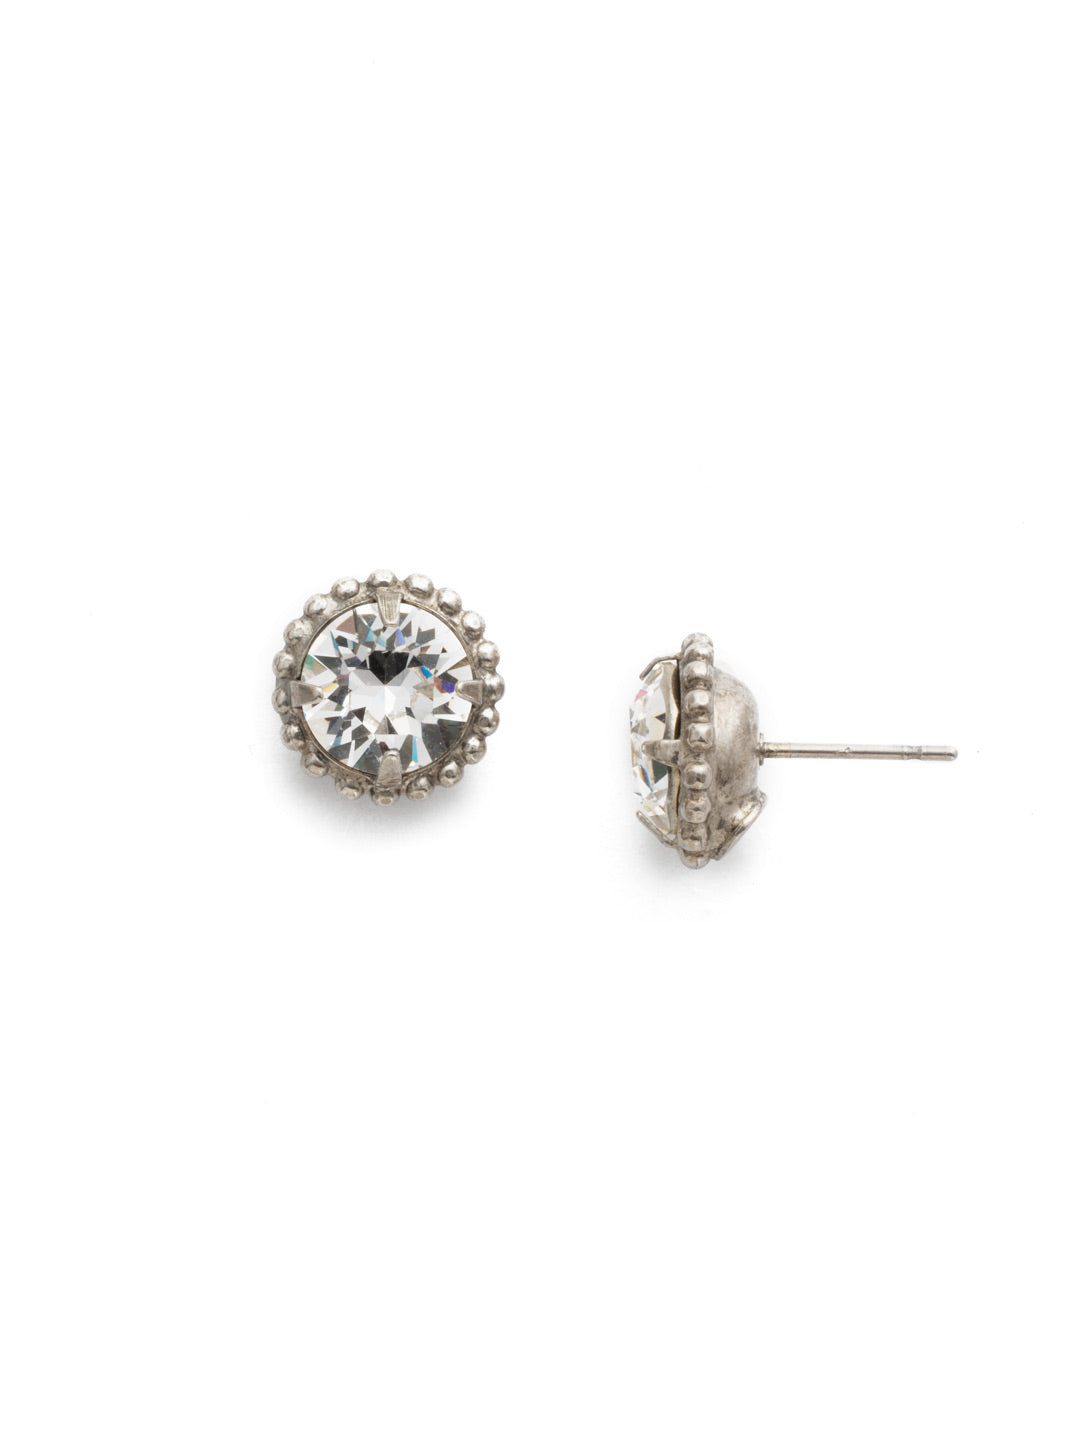 Simplicity Stud Earring - EBY38ASCRY - <p>A timeless classic, the Simplicity Stud Earrings feature round cut crystals in a variety of colors; accented with a halo of metal beaded detail. From Sorrelli's Crystal collection in our Antique Silver-tone finish.</p>